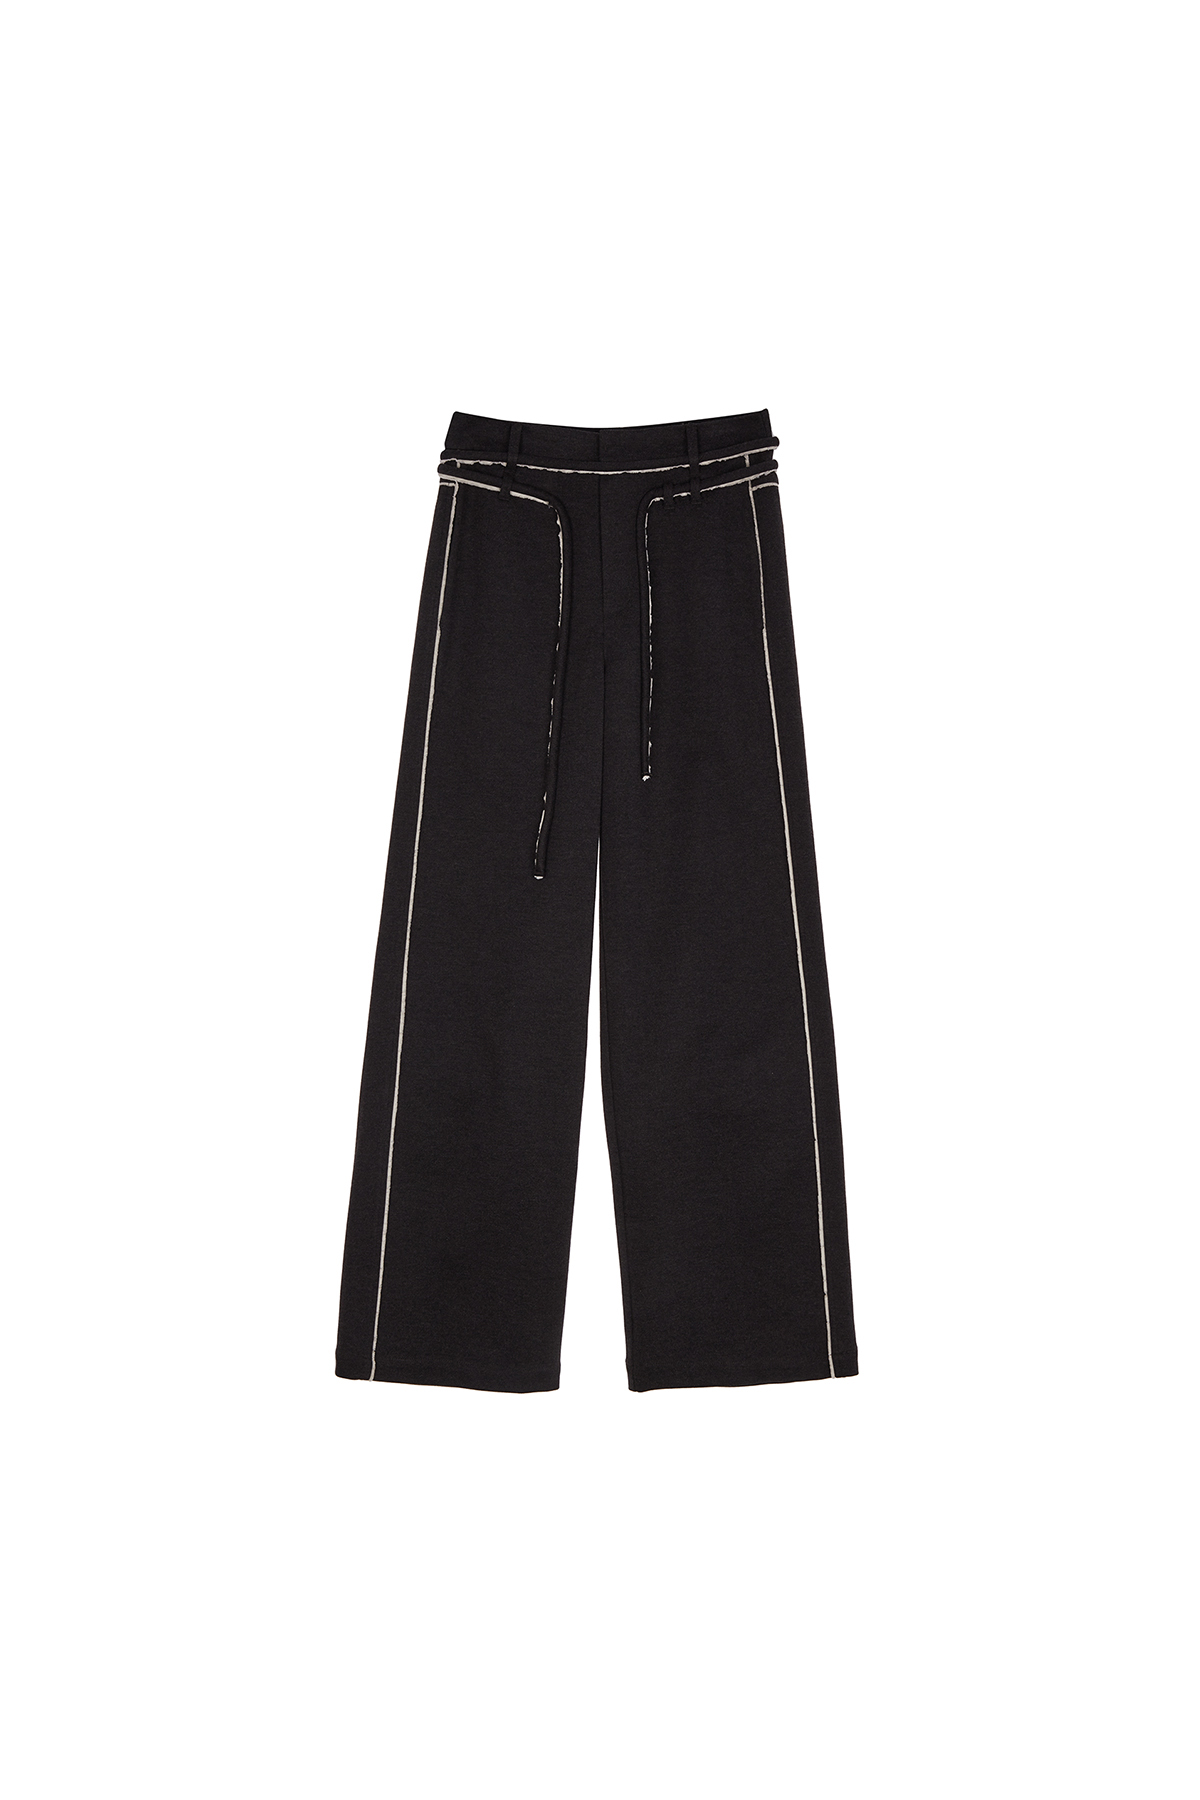 STRING CUT OFF TROUSER IN CHARCOAL